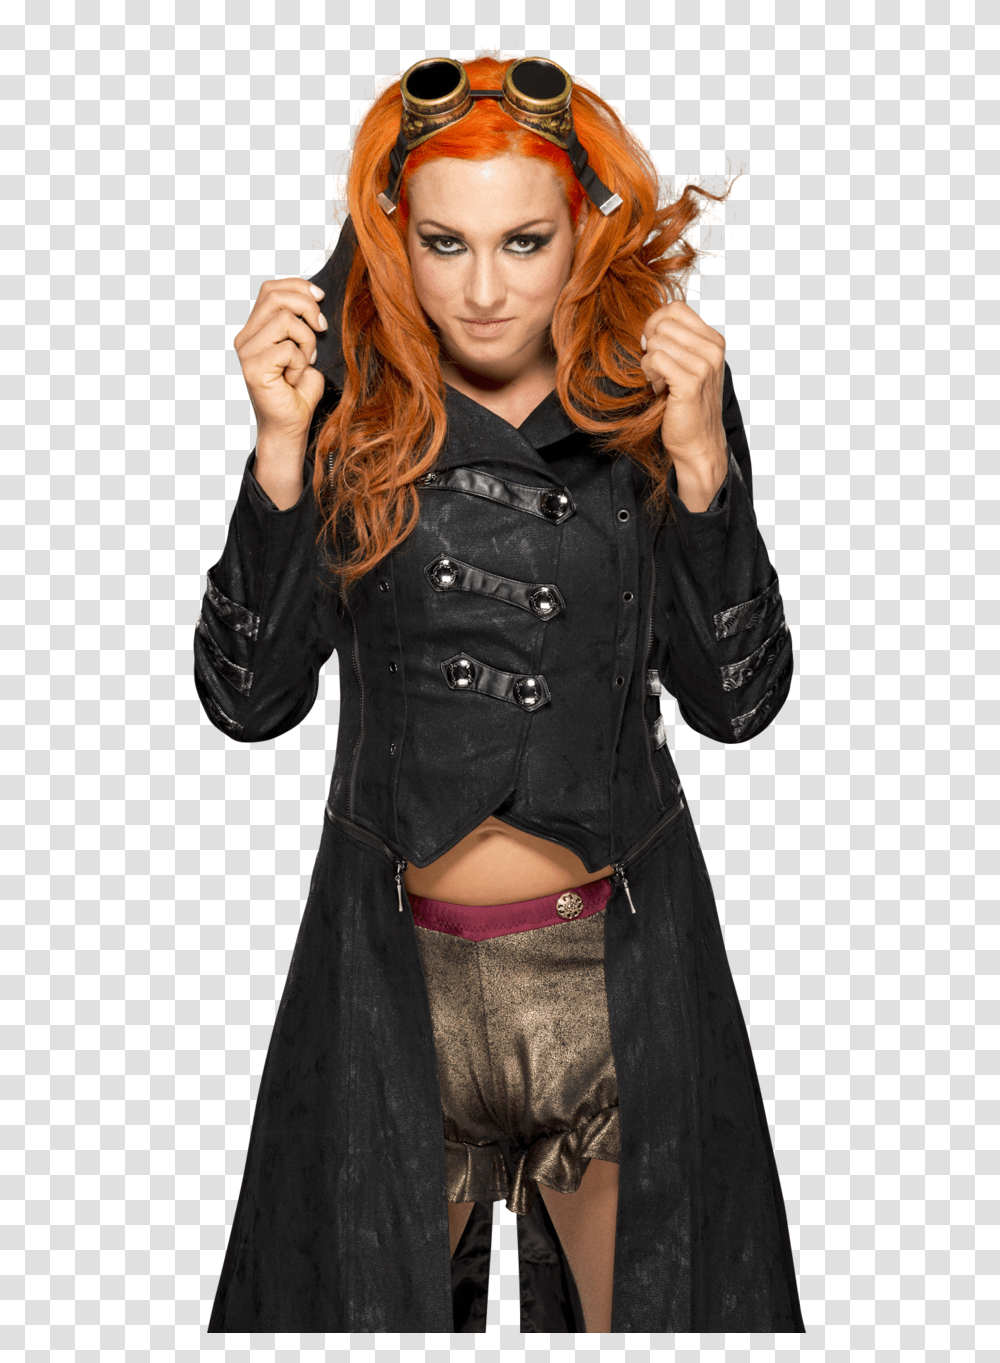 For Rhm Becky Lynch Becky Lynch Wallpaper For Iphone, Clothing, Sunglasses, Jacket, Coat Transparent Png